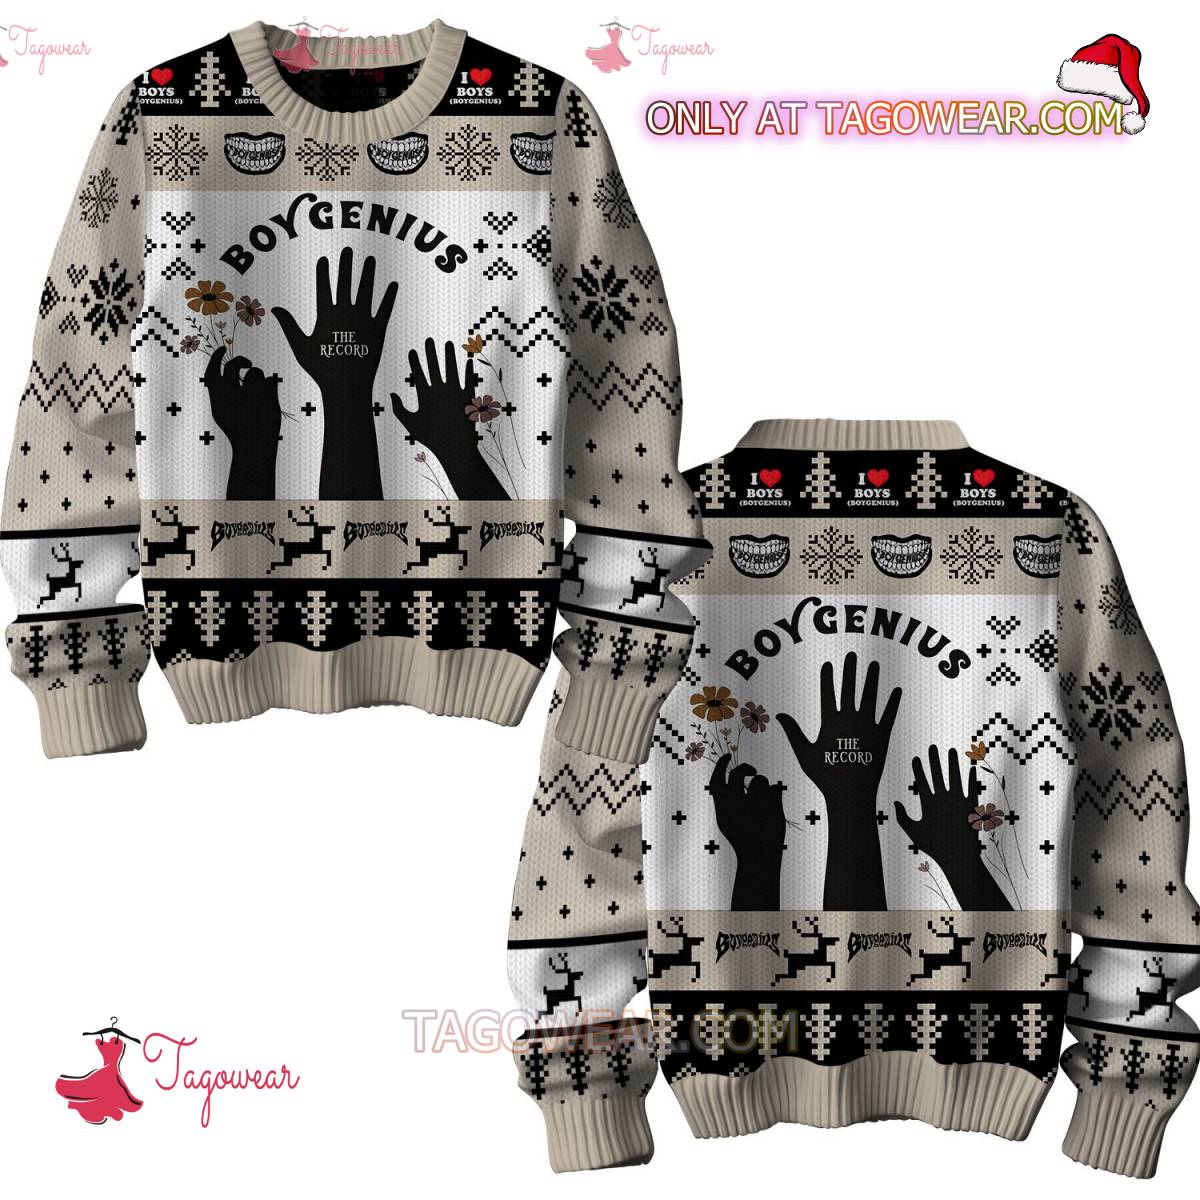 Boygenius The Record Ugly Christmas Sweater